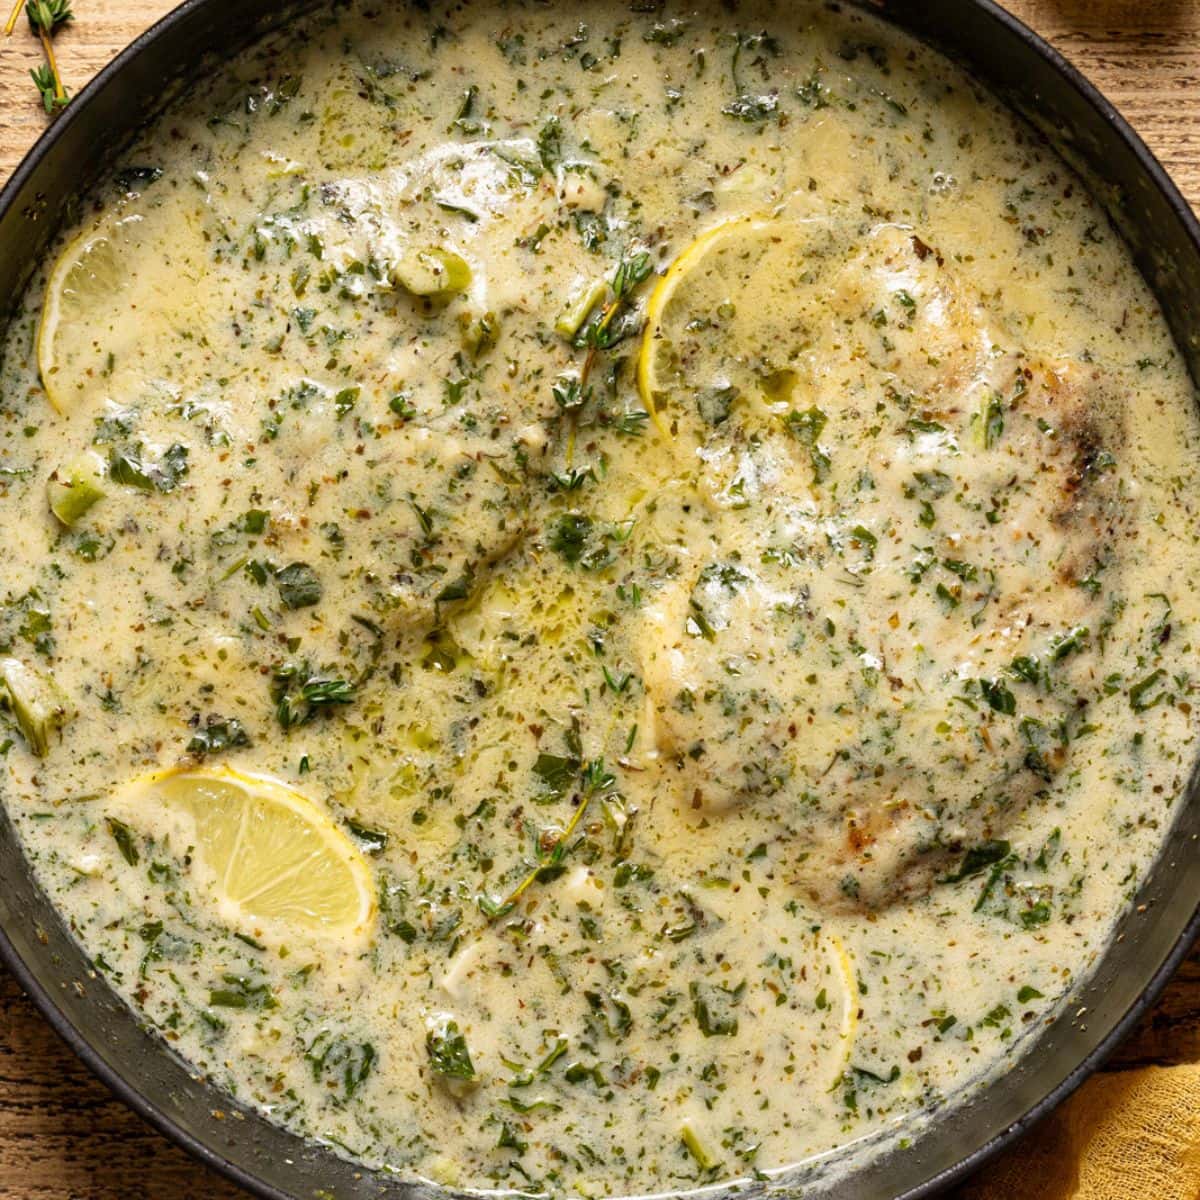 Creamy tilapia in black skillet with thyme sprigs and lemon.